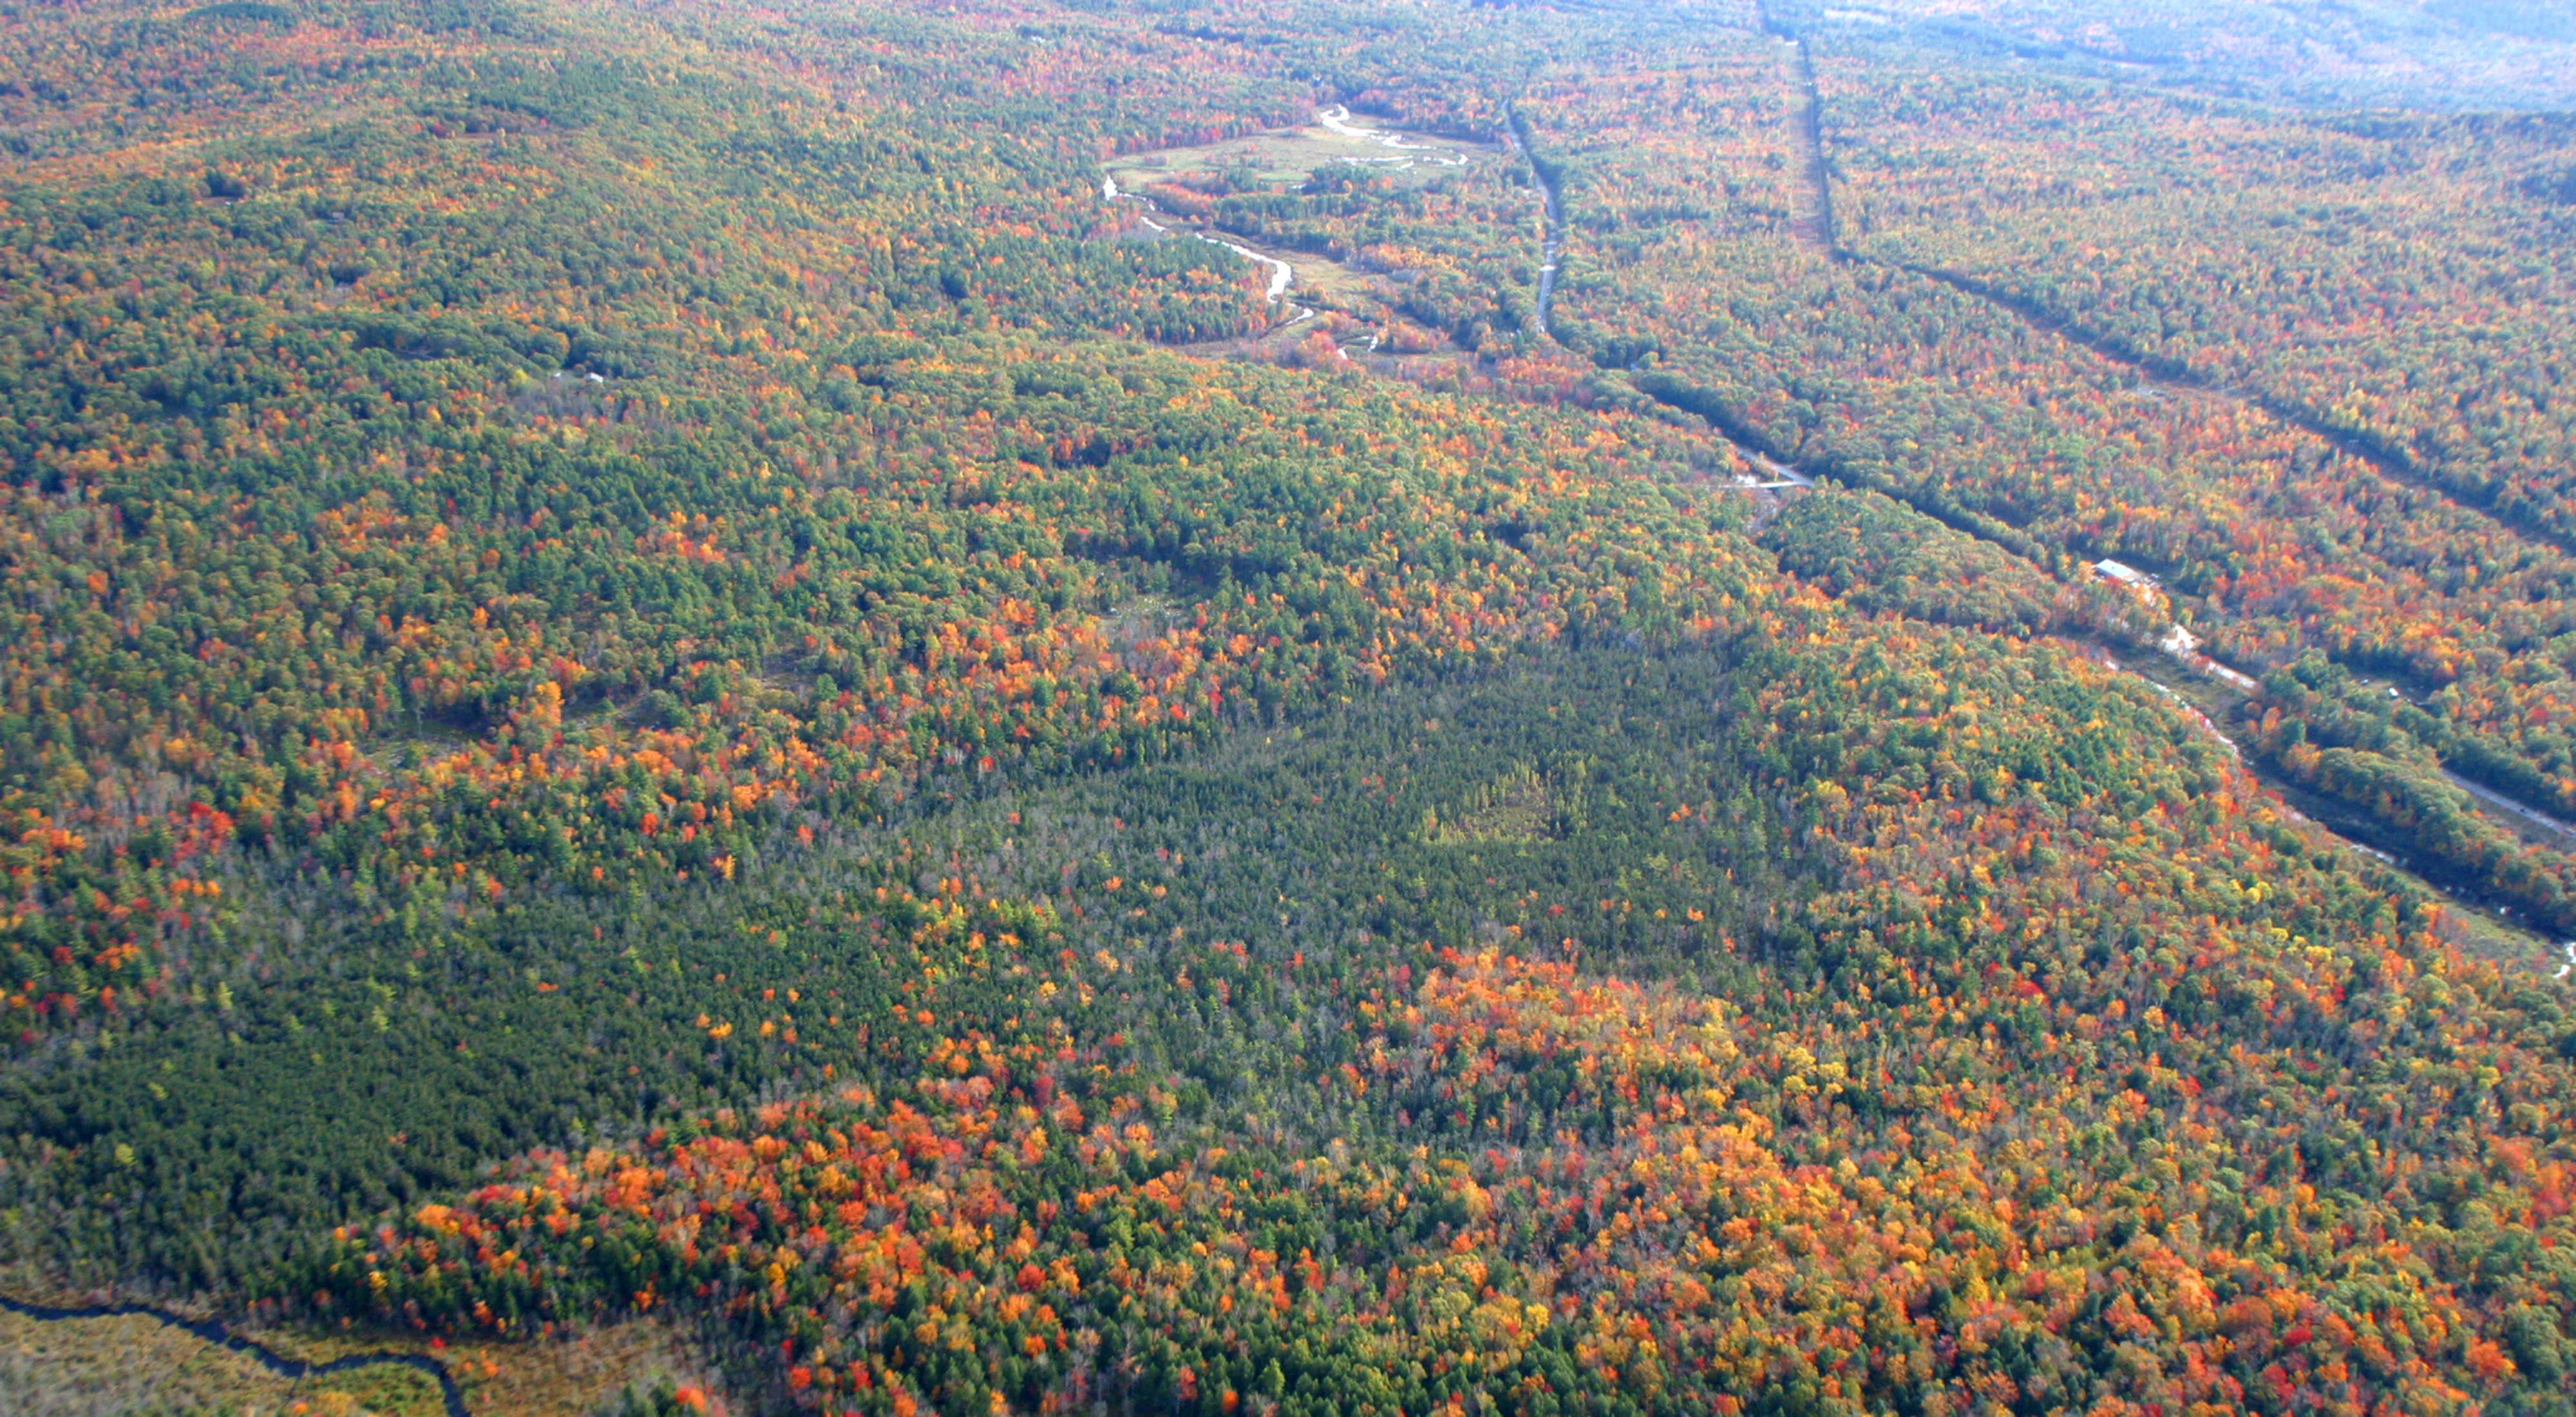 Fall descends upon Loverens Mill Cedar Swamp Preserve in Antrim, New Hampshire.